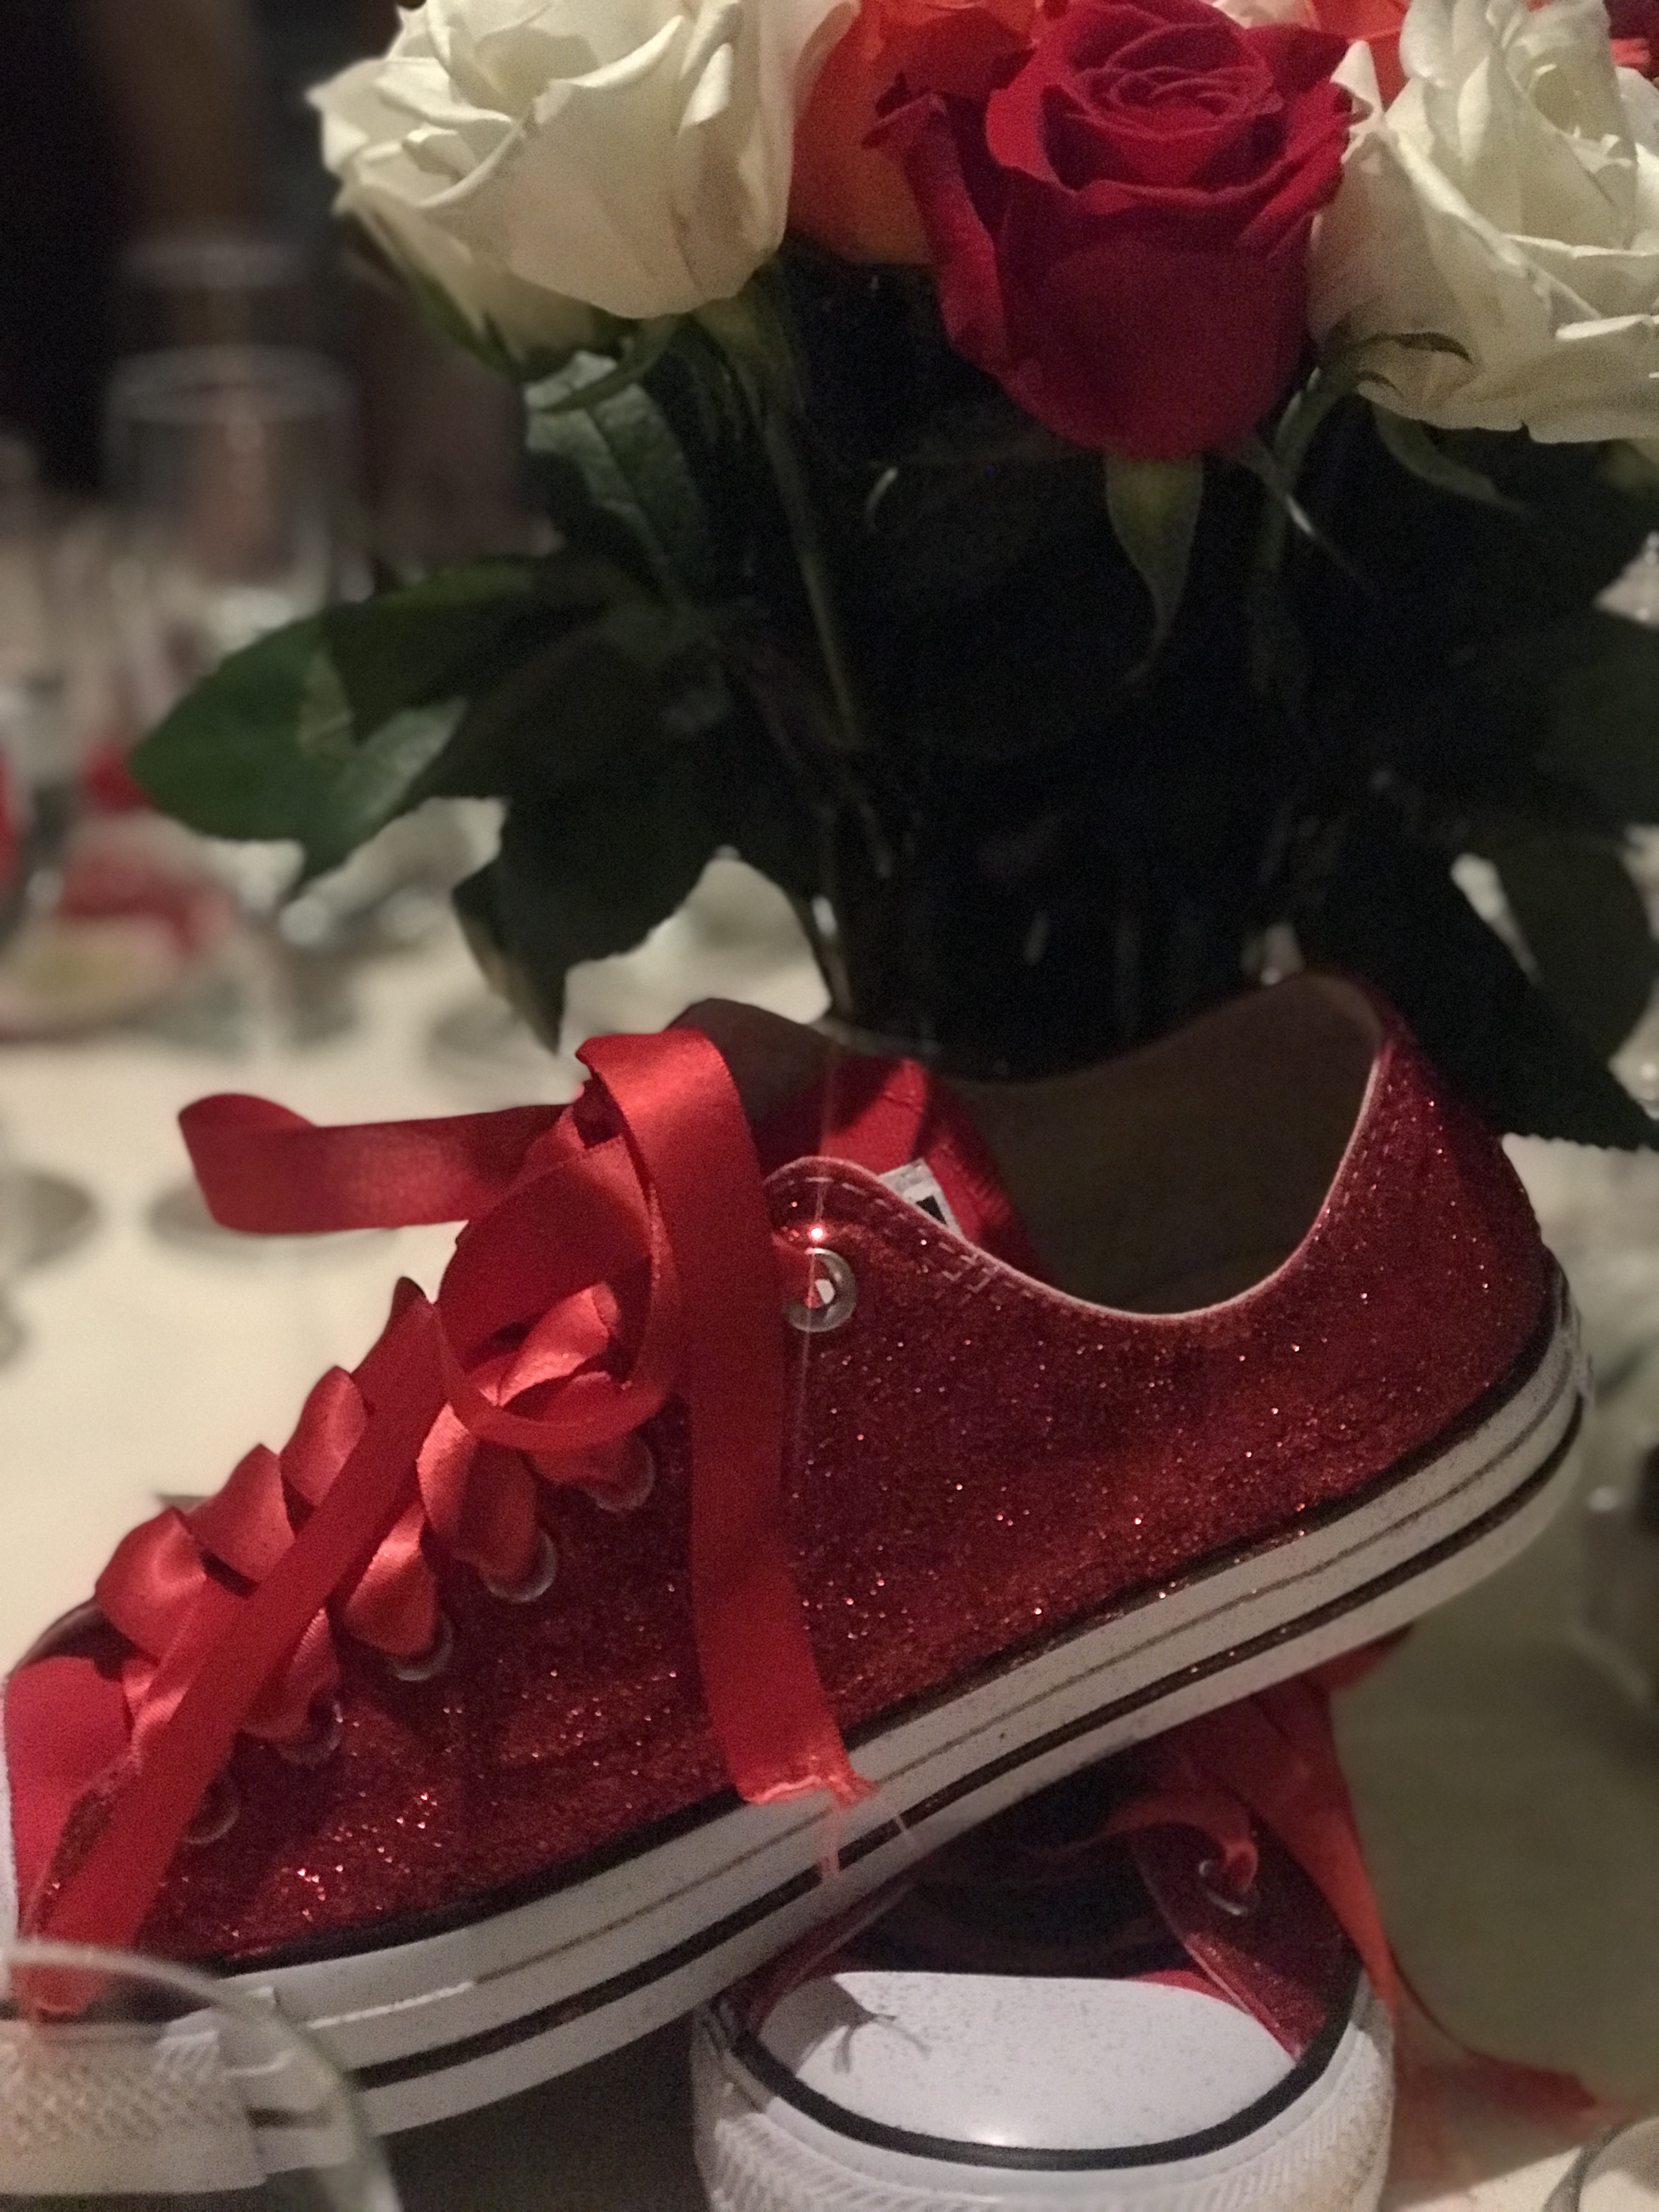 Red Sneakers for Oakley and . (End Allergies Together) Host Evening to  Support Food Allergy Awareness and Research Toward a Cure | Newswire